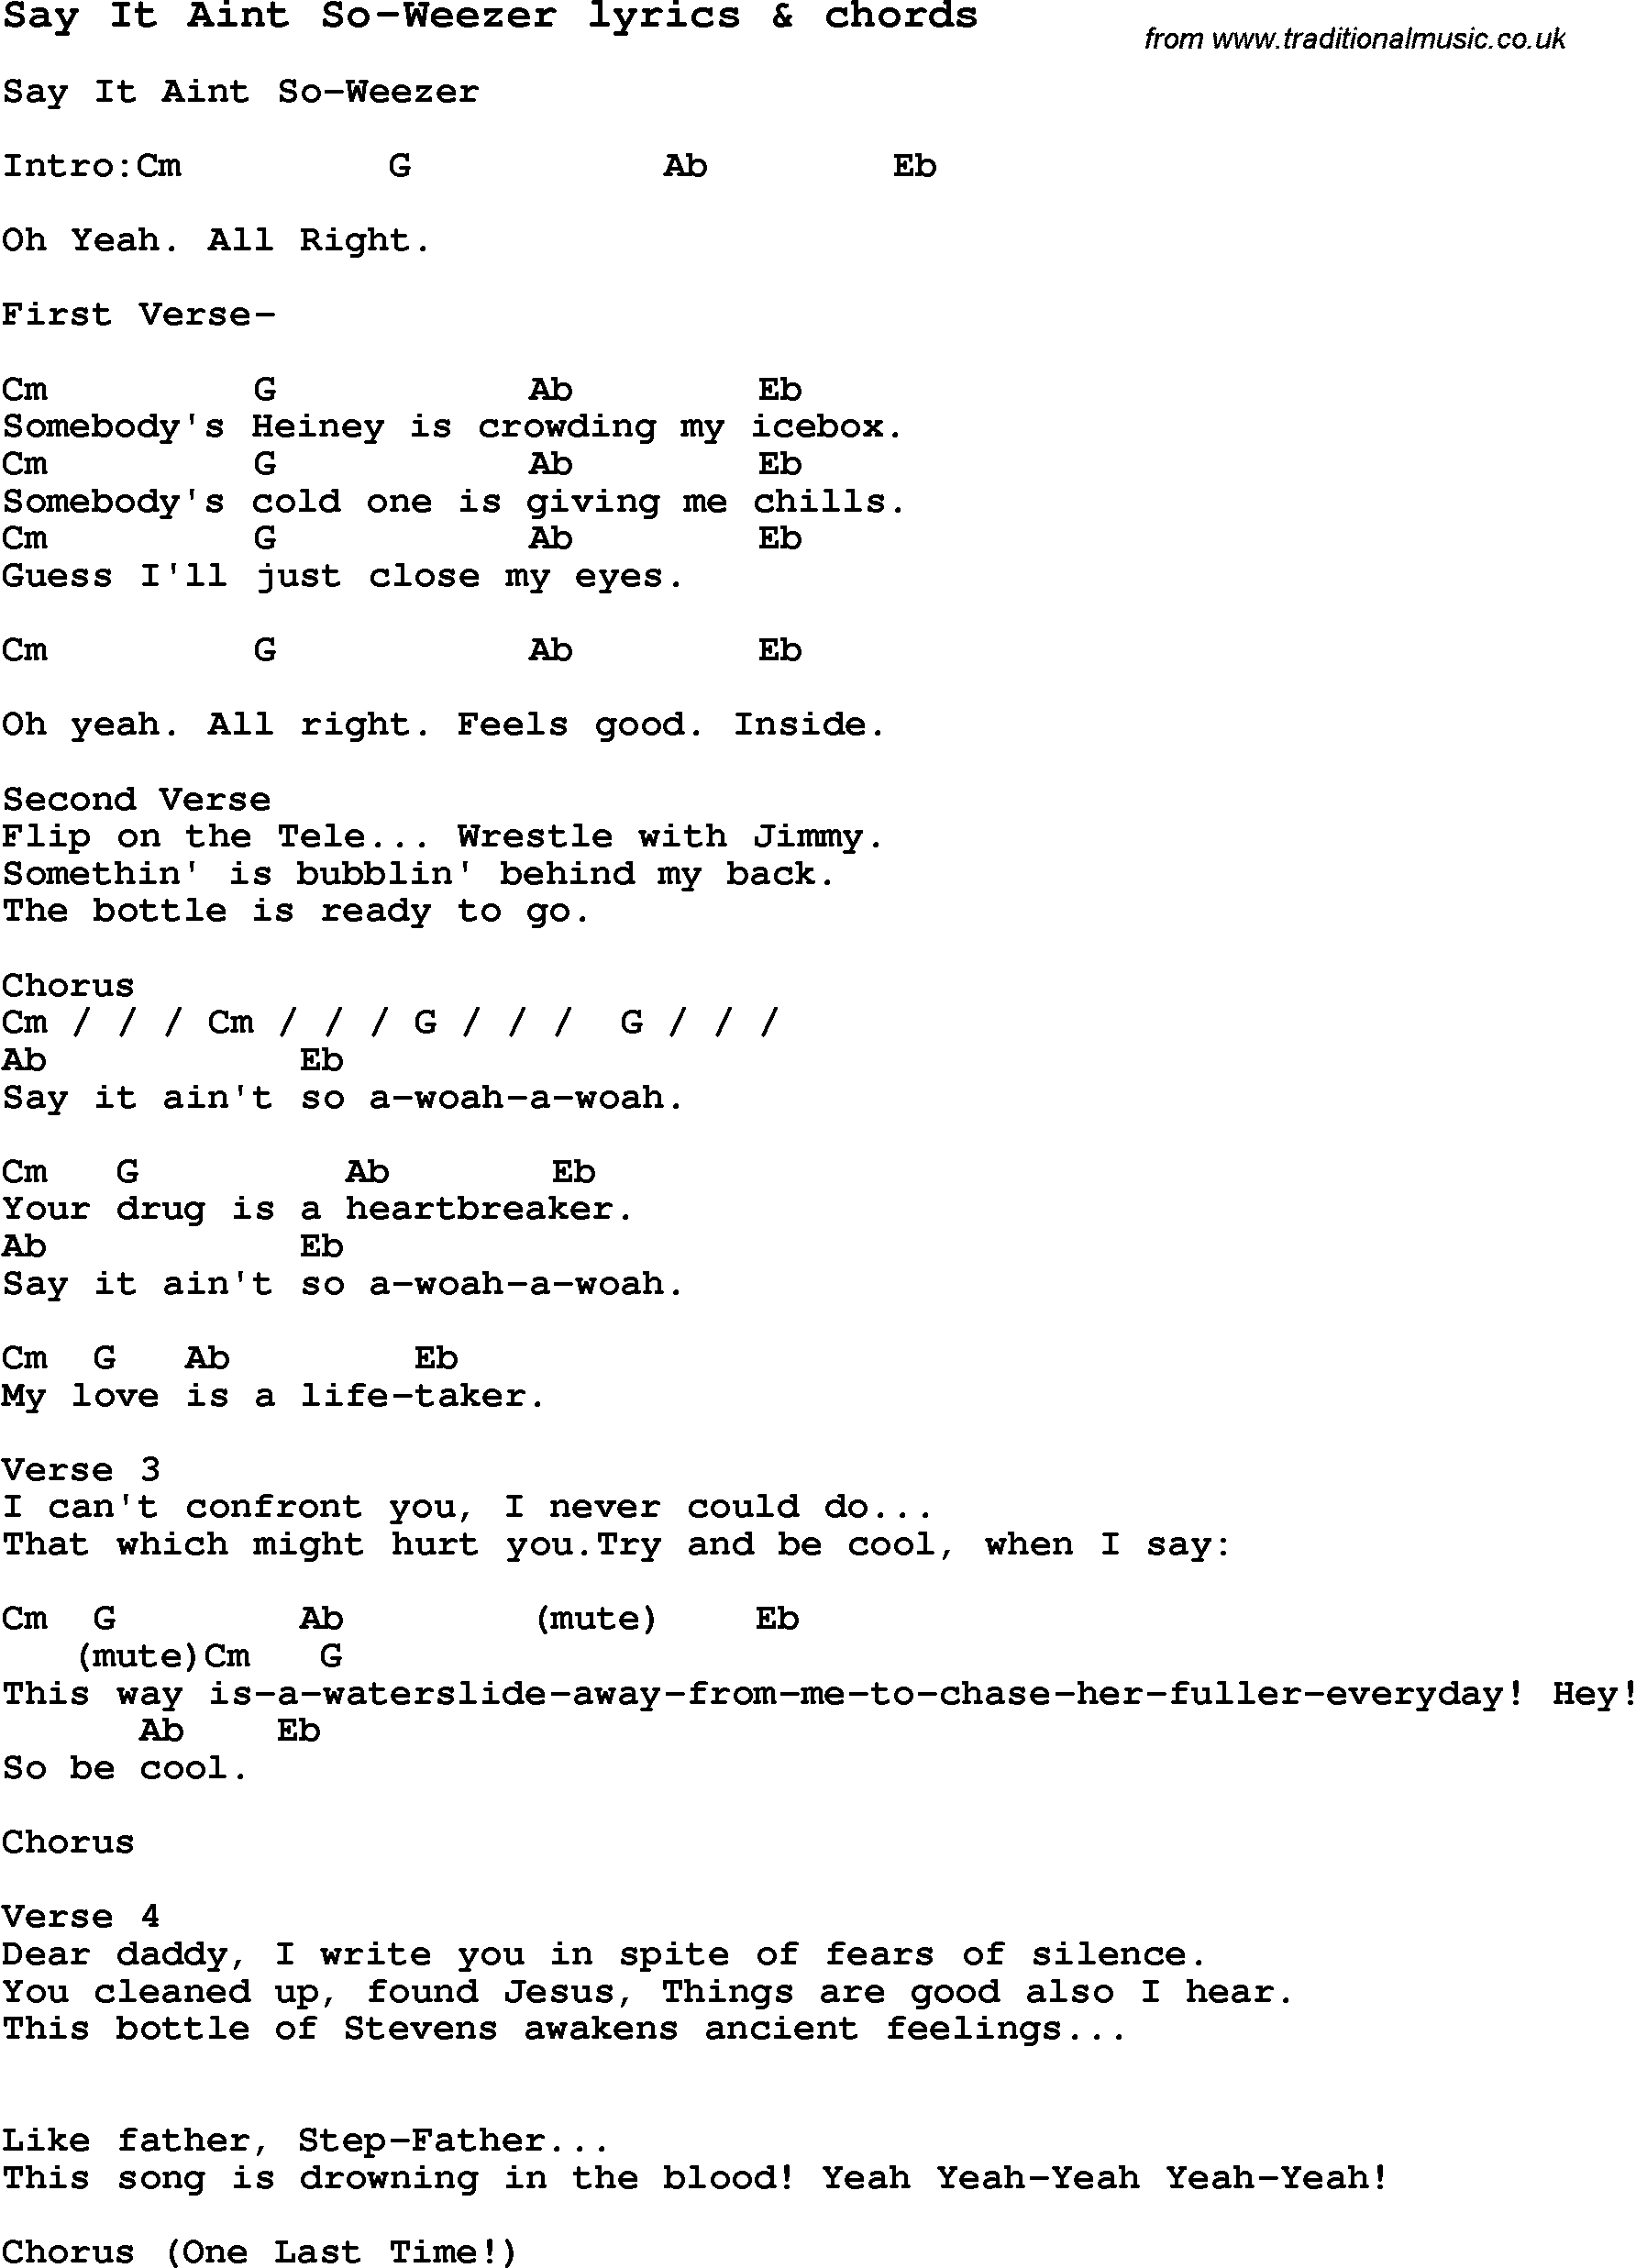 Love Song Lyrics for: Say It Aint So-Weezer with chords for Ukulele, Guitar Banjo etc.